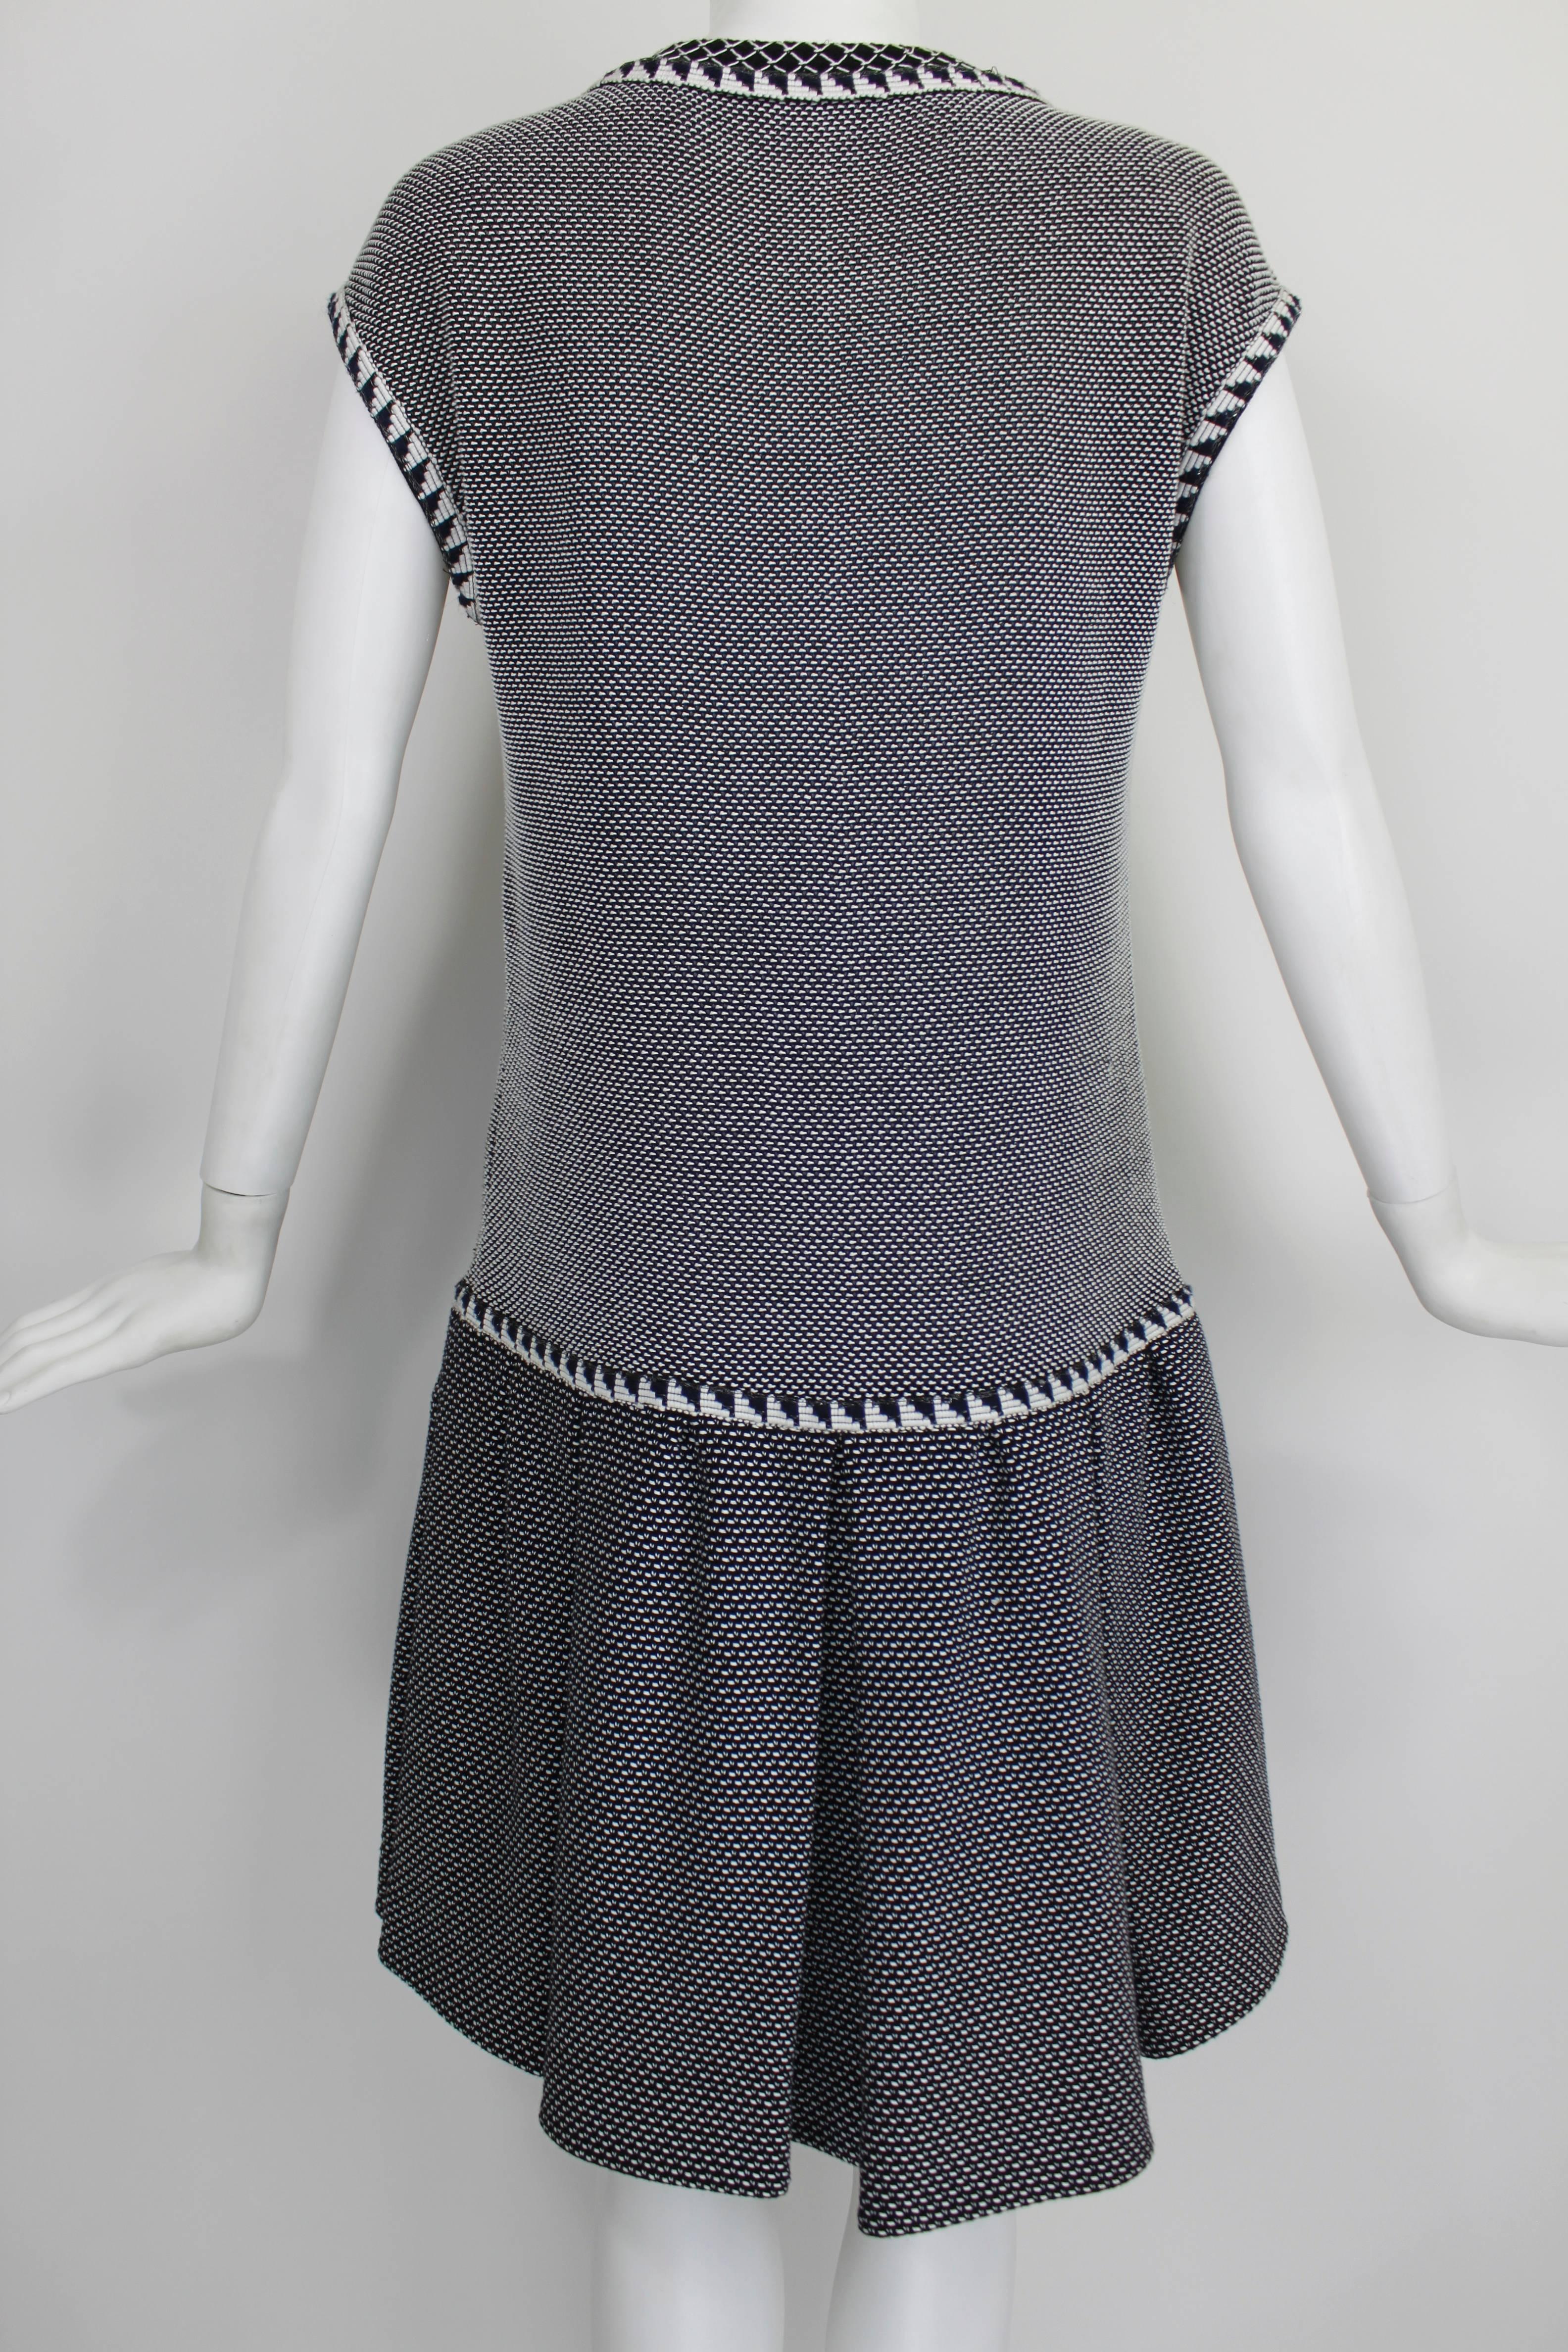 1990s CHANEL Graphic Knit Drop Waisted Pleated Dress 1